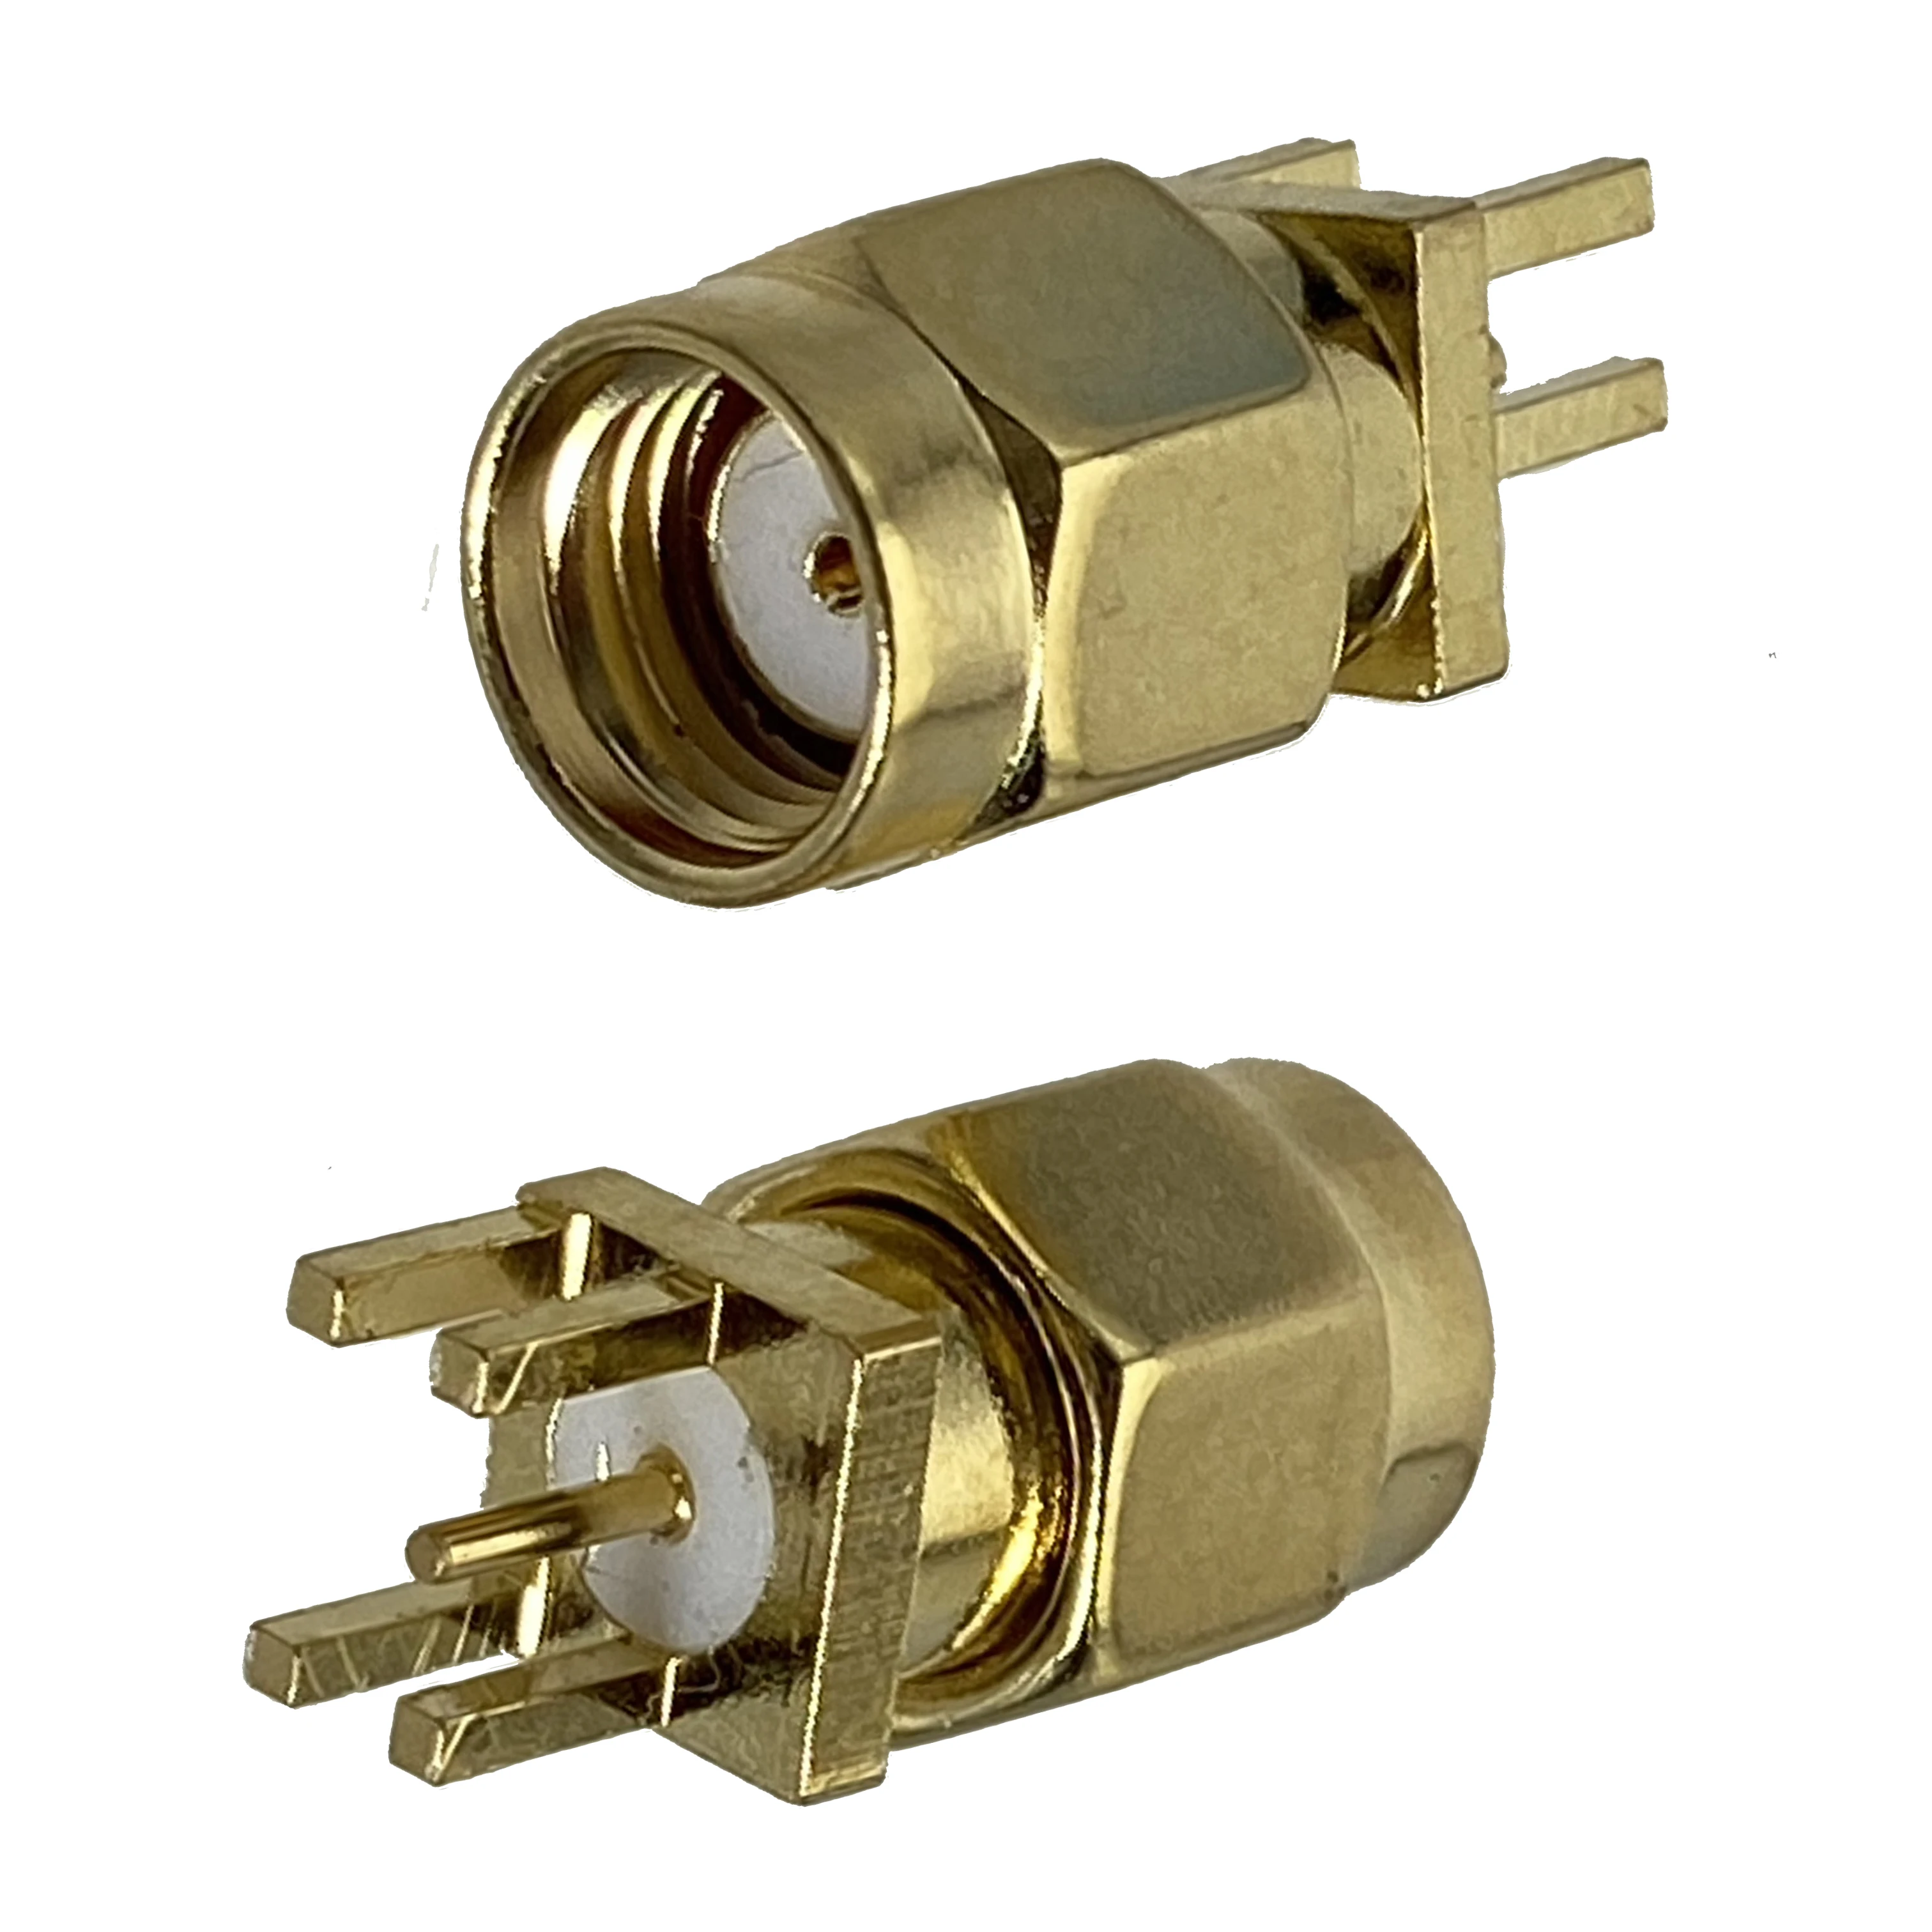 1pcs-connector-rp-sma-male-jack-solder-pcb-edge-clip-mount-wire-terminals-50ohm-rf-coaxial-adapter